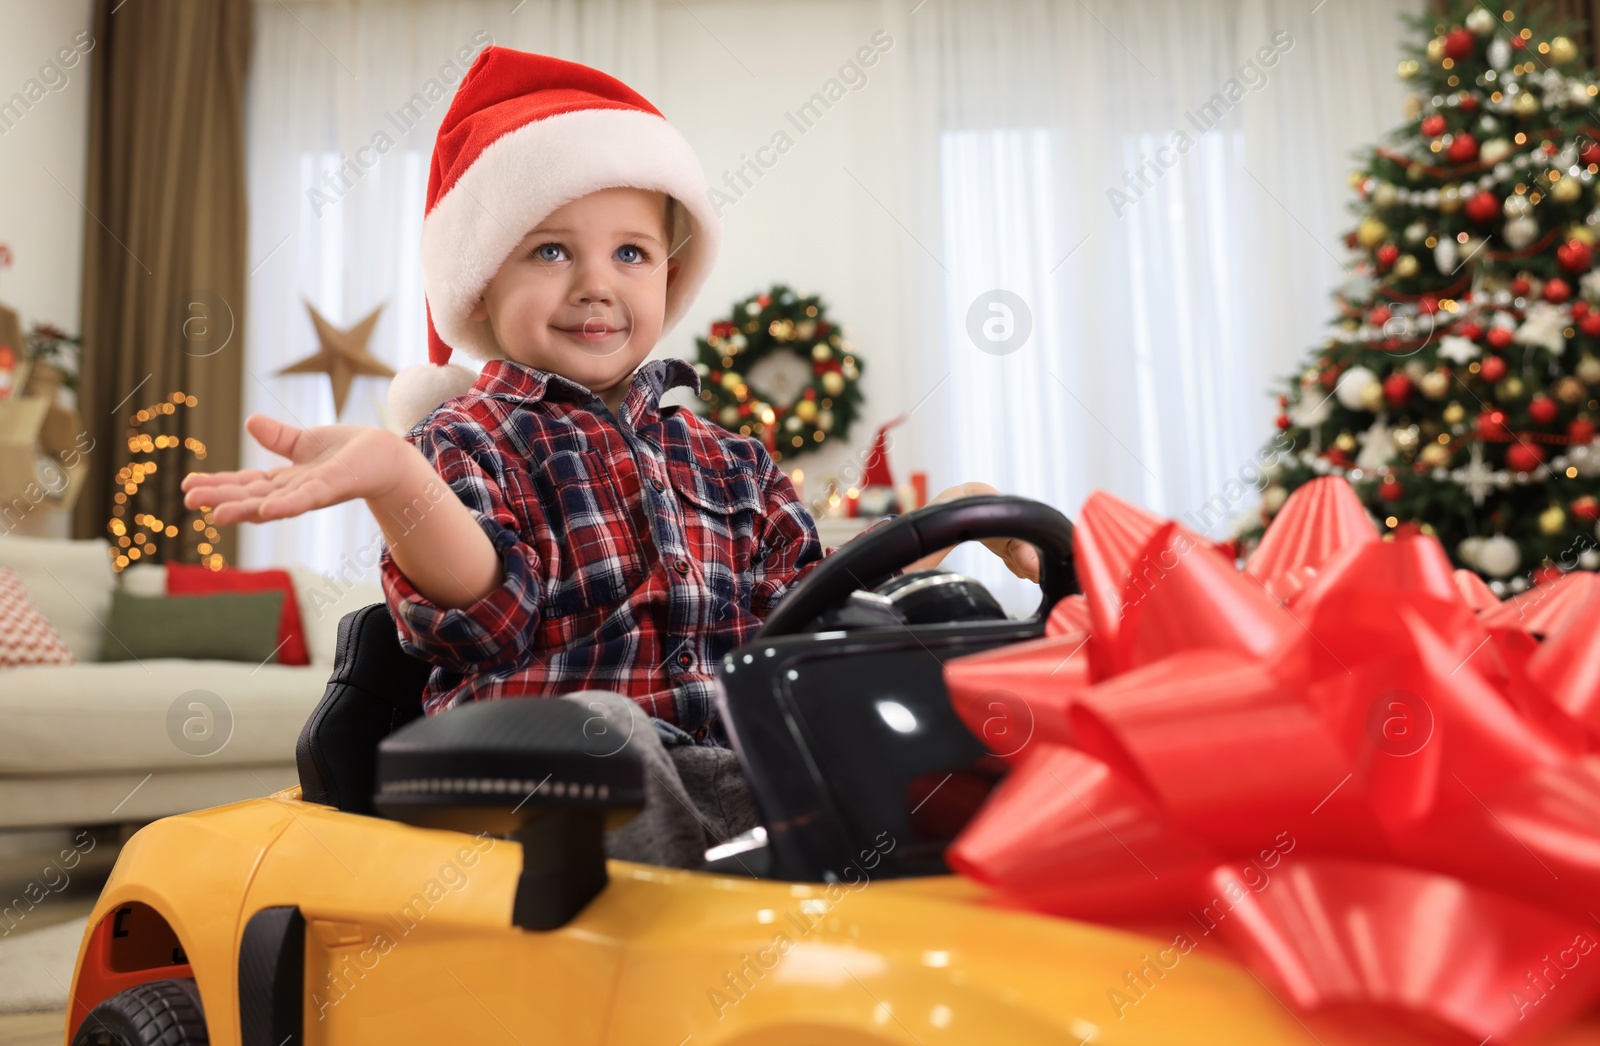 Photo of Cute little boy sitting inside toy car in room decorated for Christmas